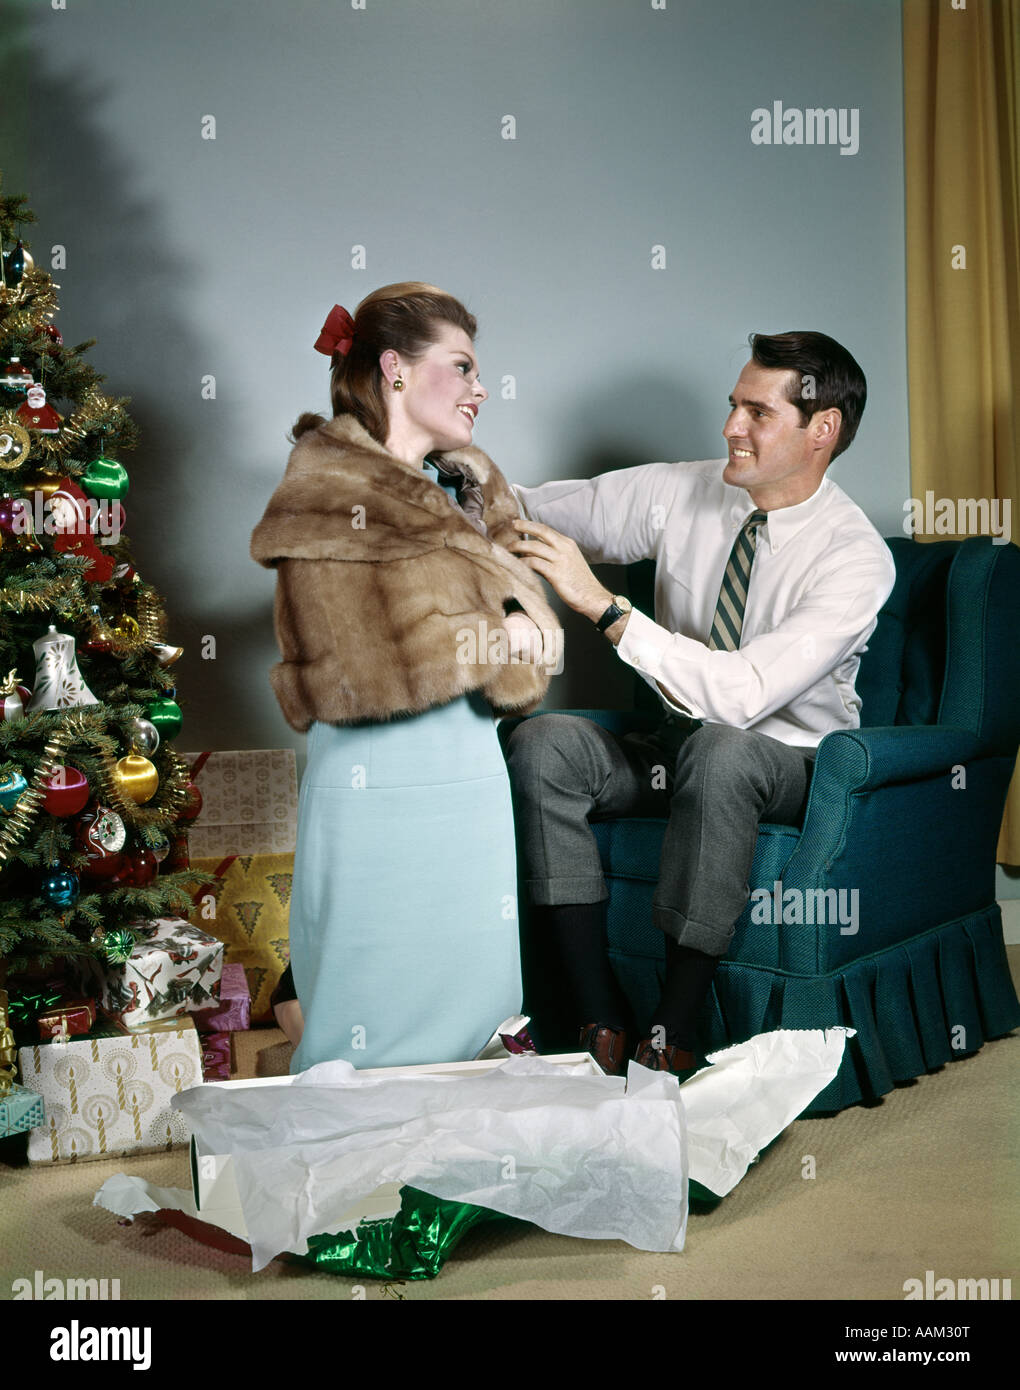 1970s LIFESTYLE COUPLE MAN ADJUSTING NEW HOLIDAY GIFT FUR JACKET ON WIFE IN LIVING ROOM BESIDE CHRISTMAS TREE Stock Photo